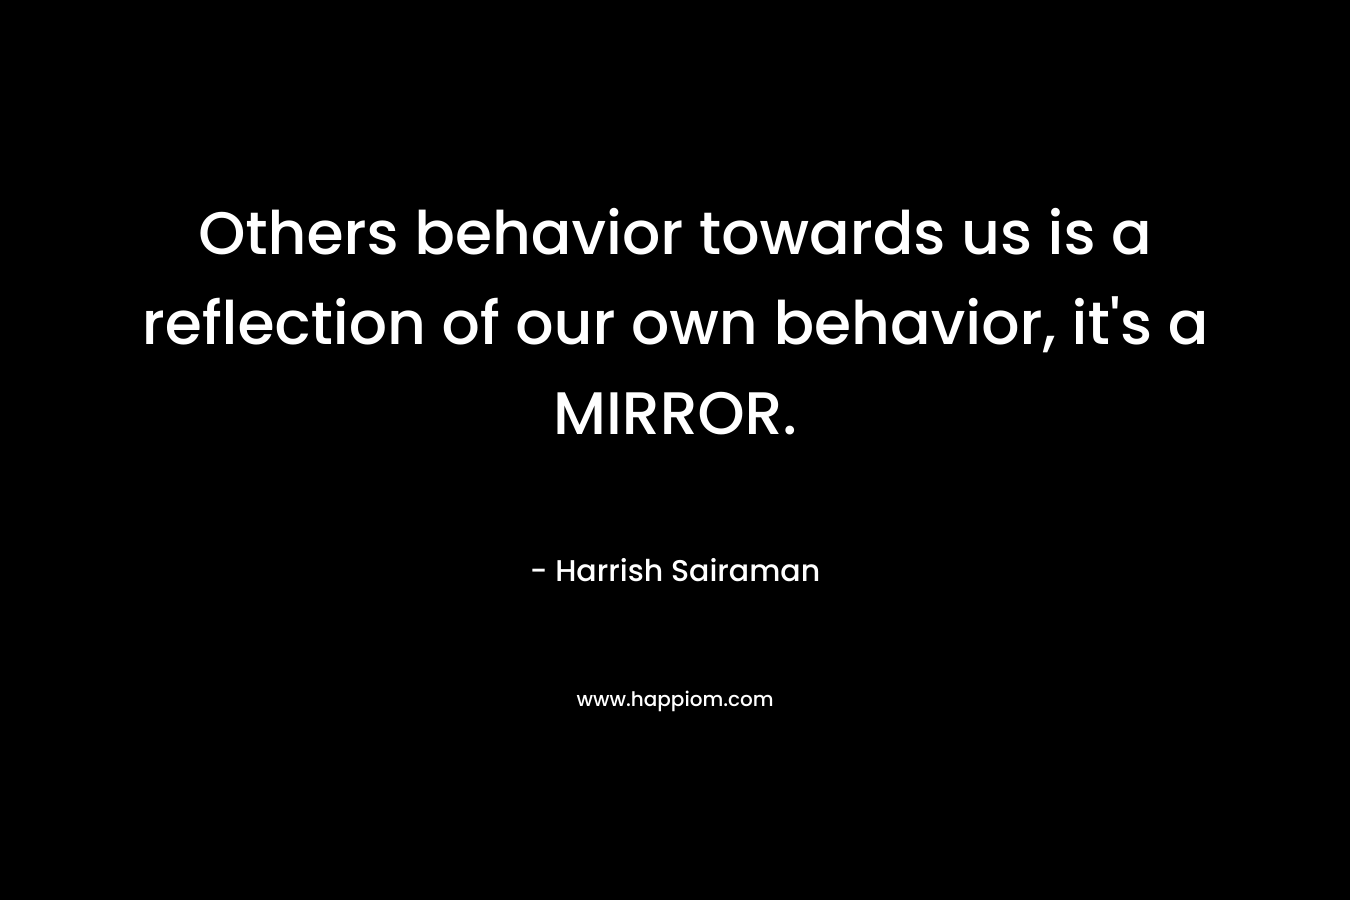 Others behavior towards us is a reflection of our own behavior, it's a MIRROR.